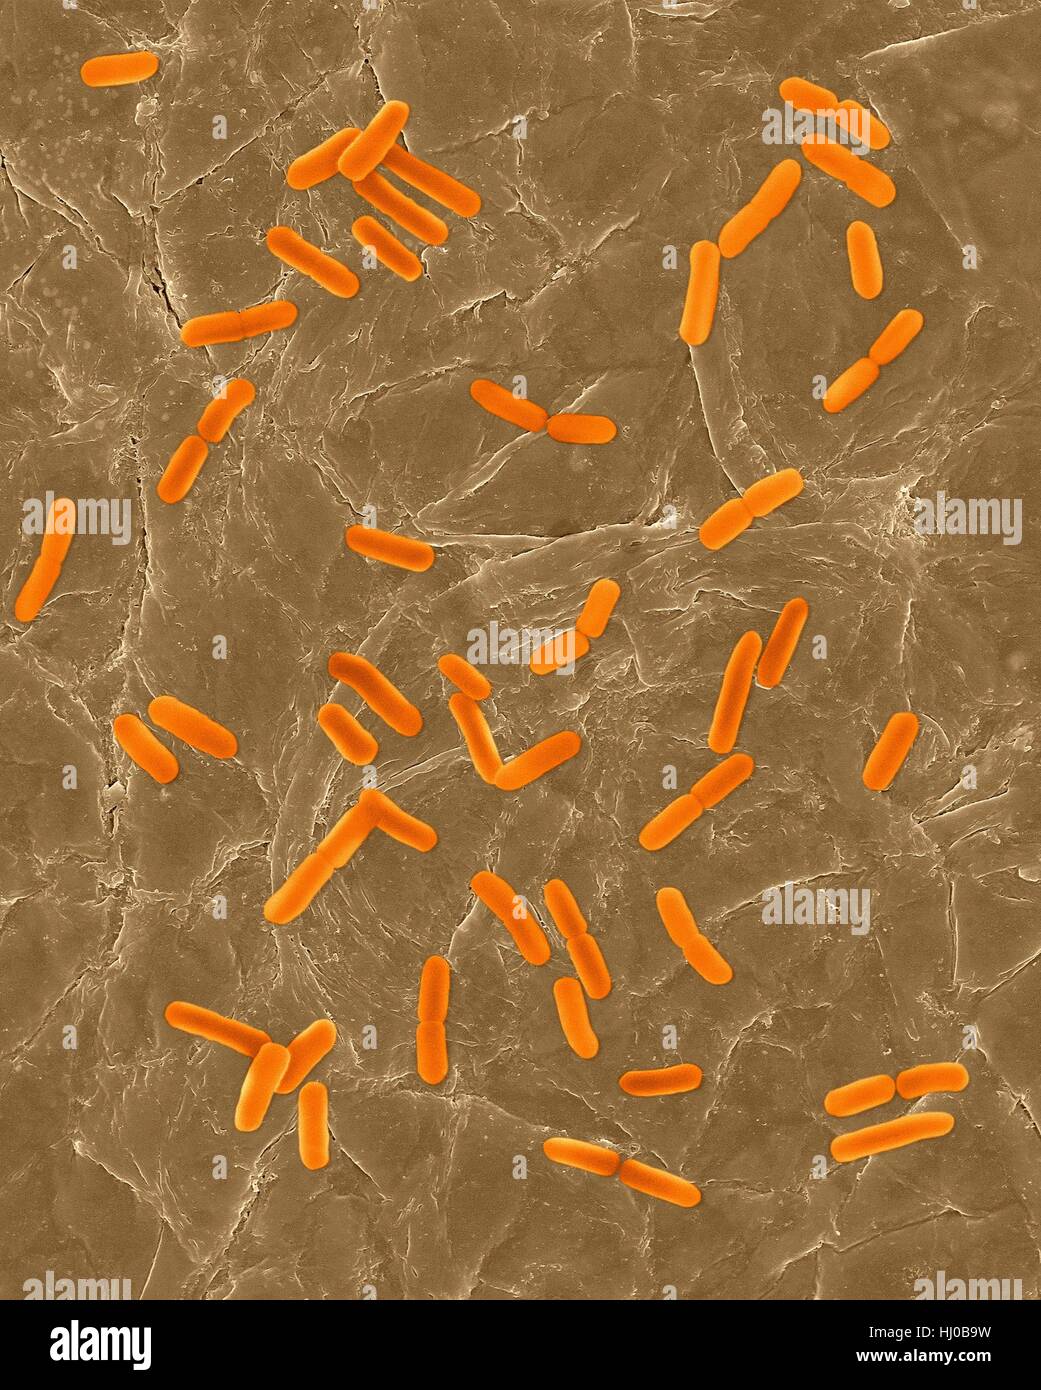 Coloured scanning electron micrograph (SEM) of Photocomposite,E.coli on surface of human skin.Escherichia coli is Gram-negative,facultatively anaerobic,enteric,rod prokaryote.This bacterium is normally part of human animal microbiota.Most E.coli strains are harmless,but some strains can cause serious problems such as: food poisoning,urinary tract infections,traveller's diarrhoea nosocomial infections.The E.coli 0157:H7 strain is fatal to humans if contracted when contaminated meat is cooked inadequately.Magnification: bacteria x800; skin x200 when shortest axis printed at 25 millimetres. Stock Photo